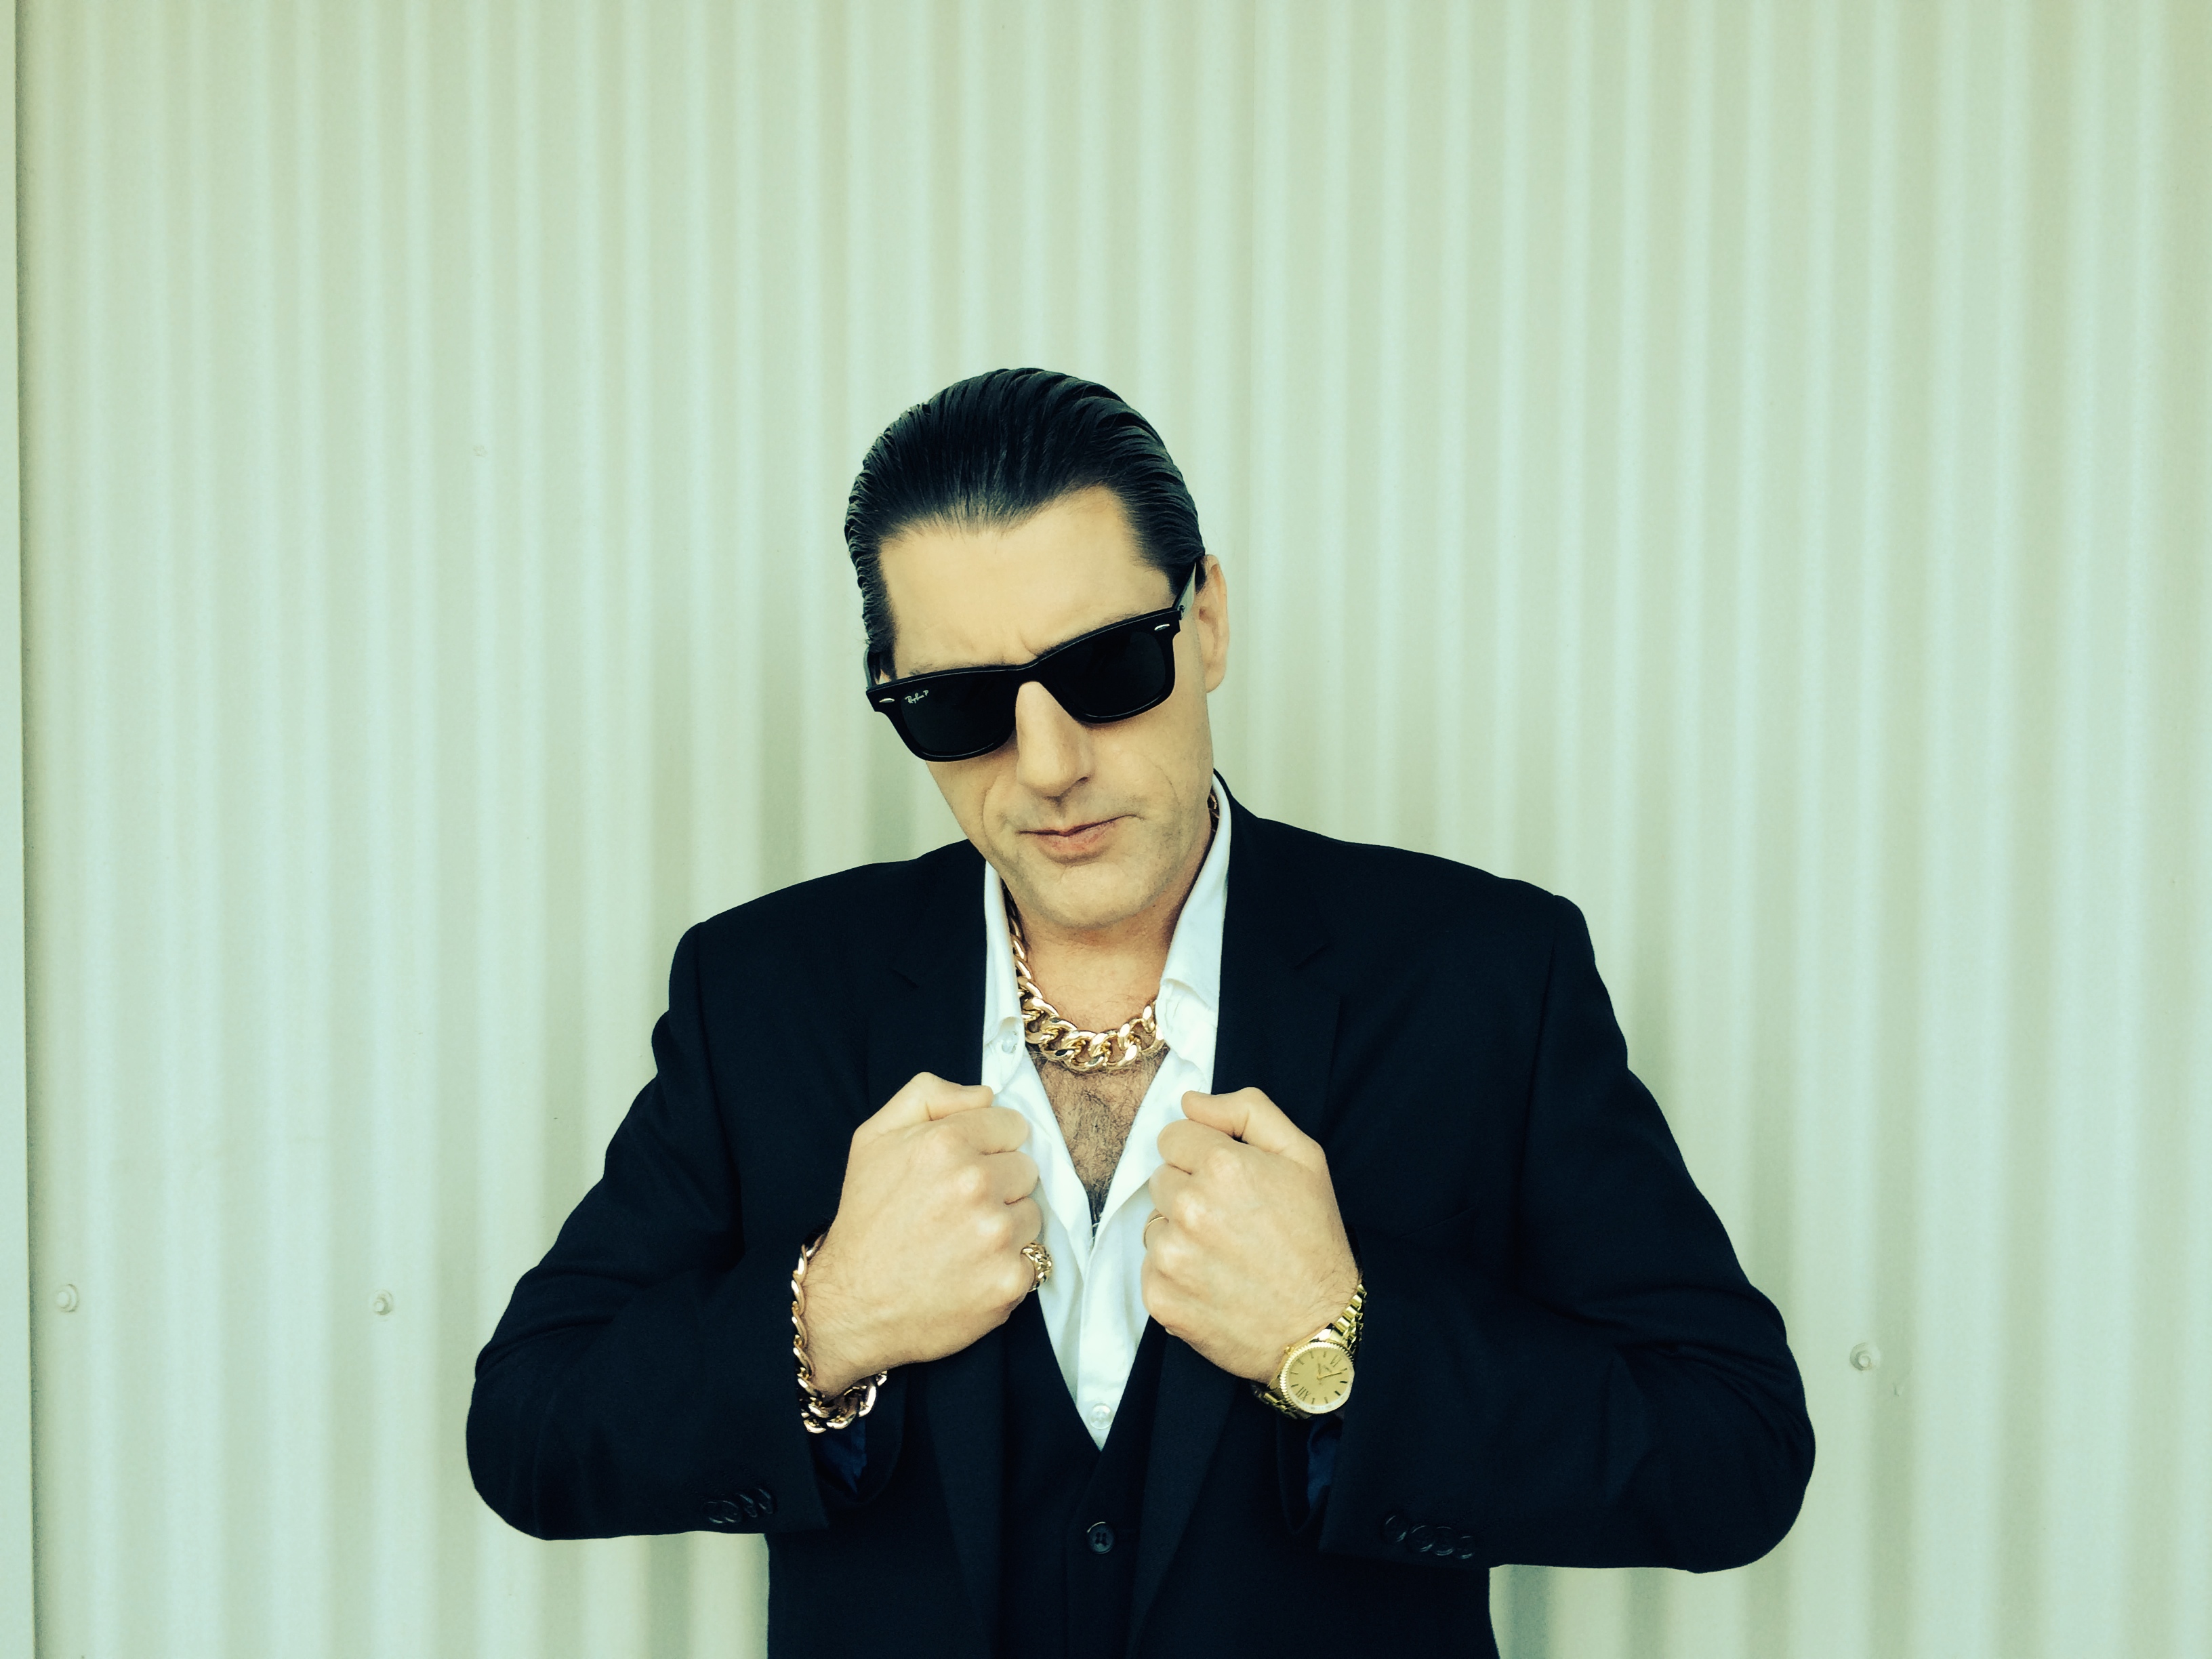 Craig Griffin as Don Antonio - Mafia Boss and Head of the Mafia Family on Project: One Shot